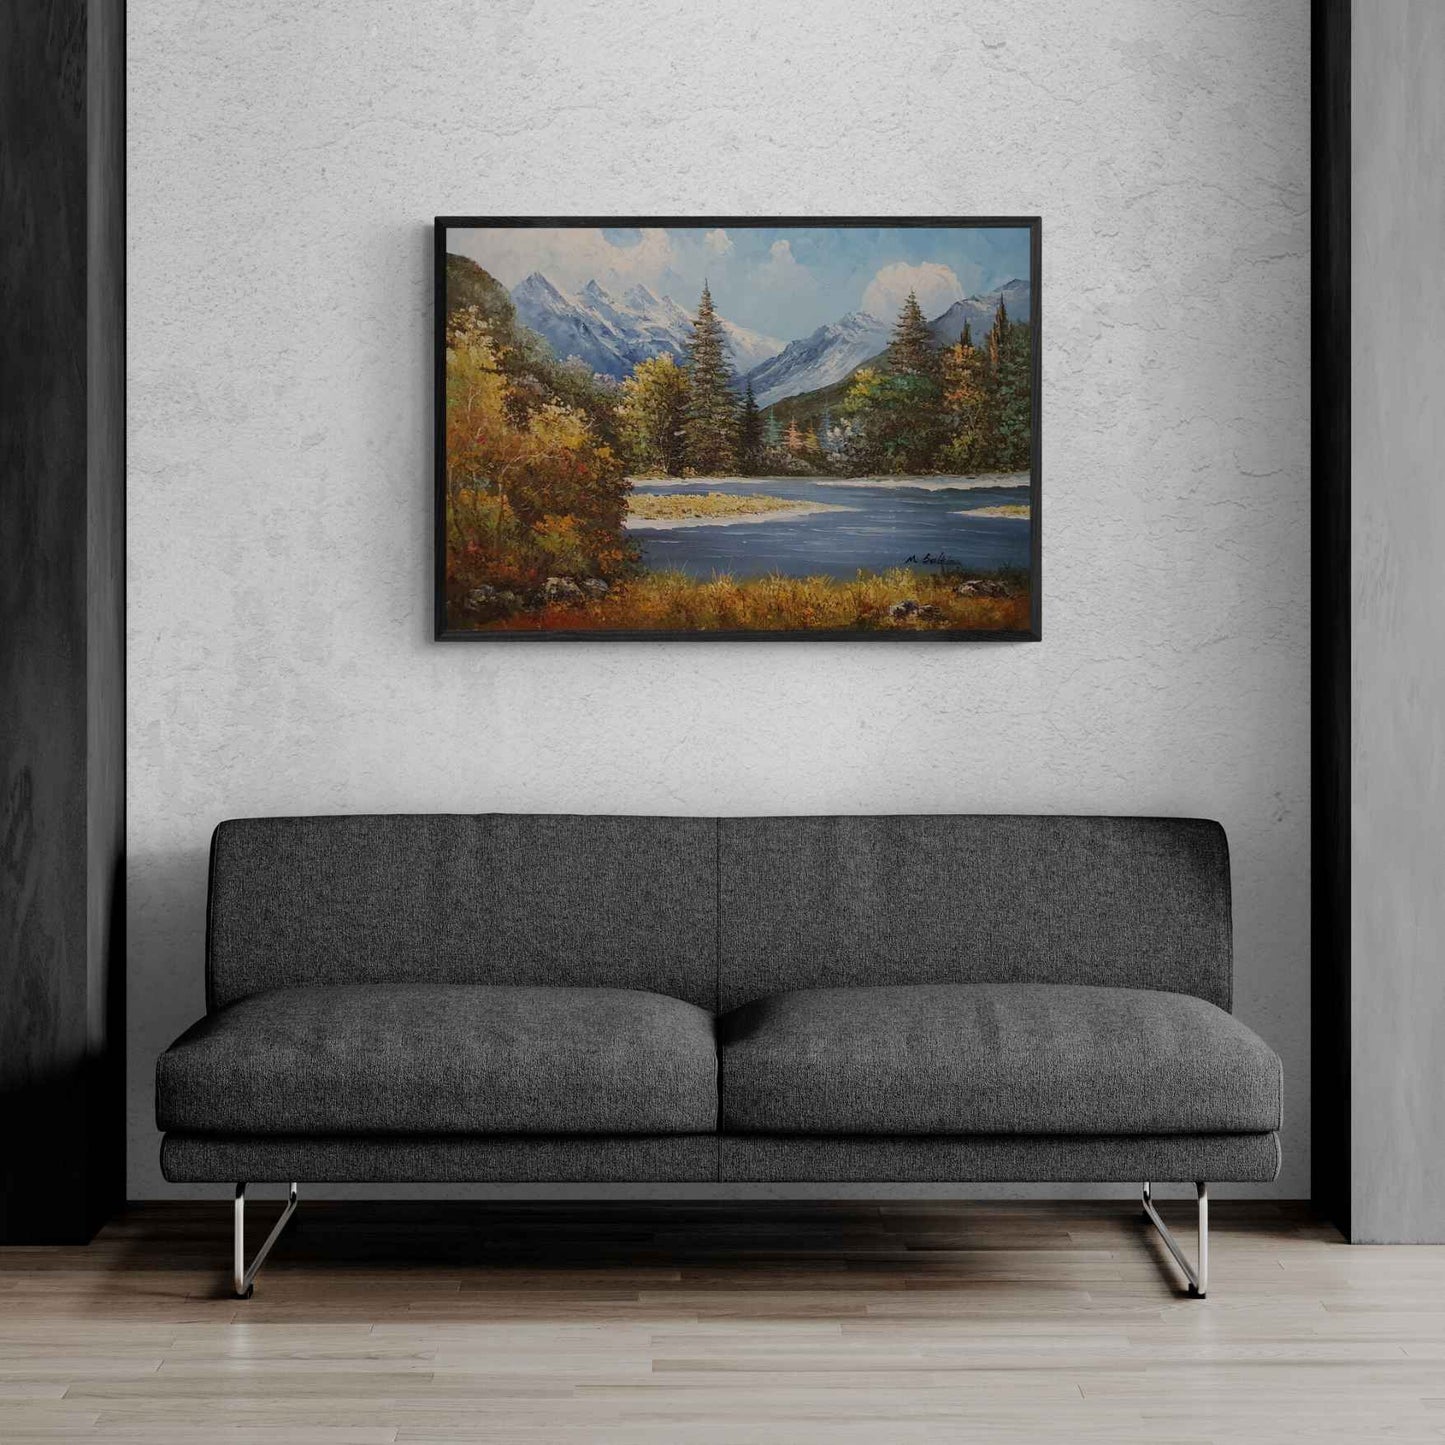 Painting The Lake Between Mountains 90x60 cm